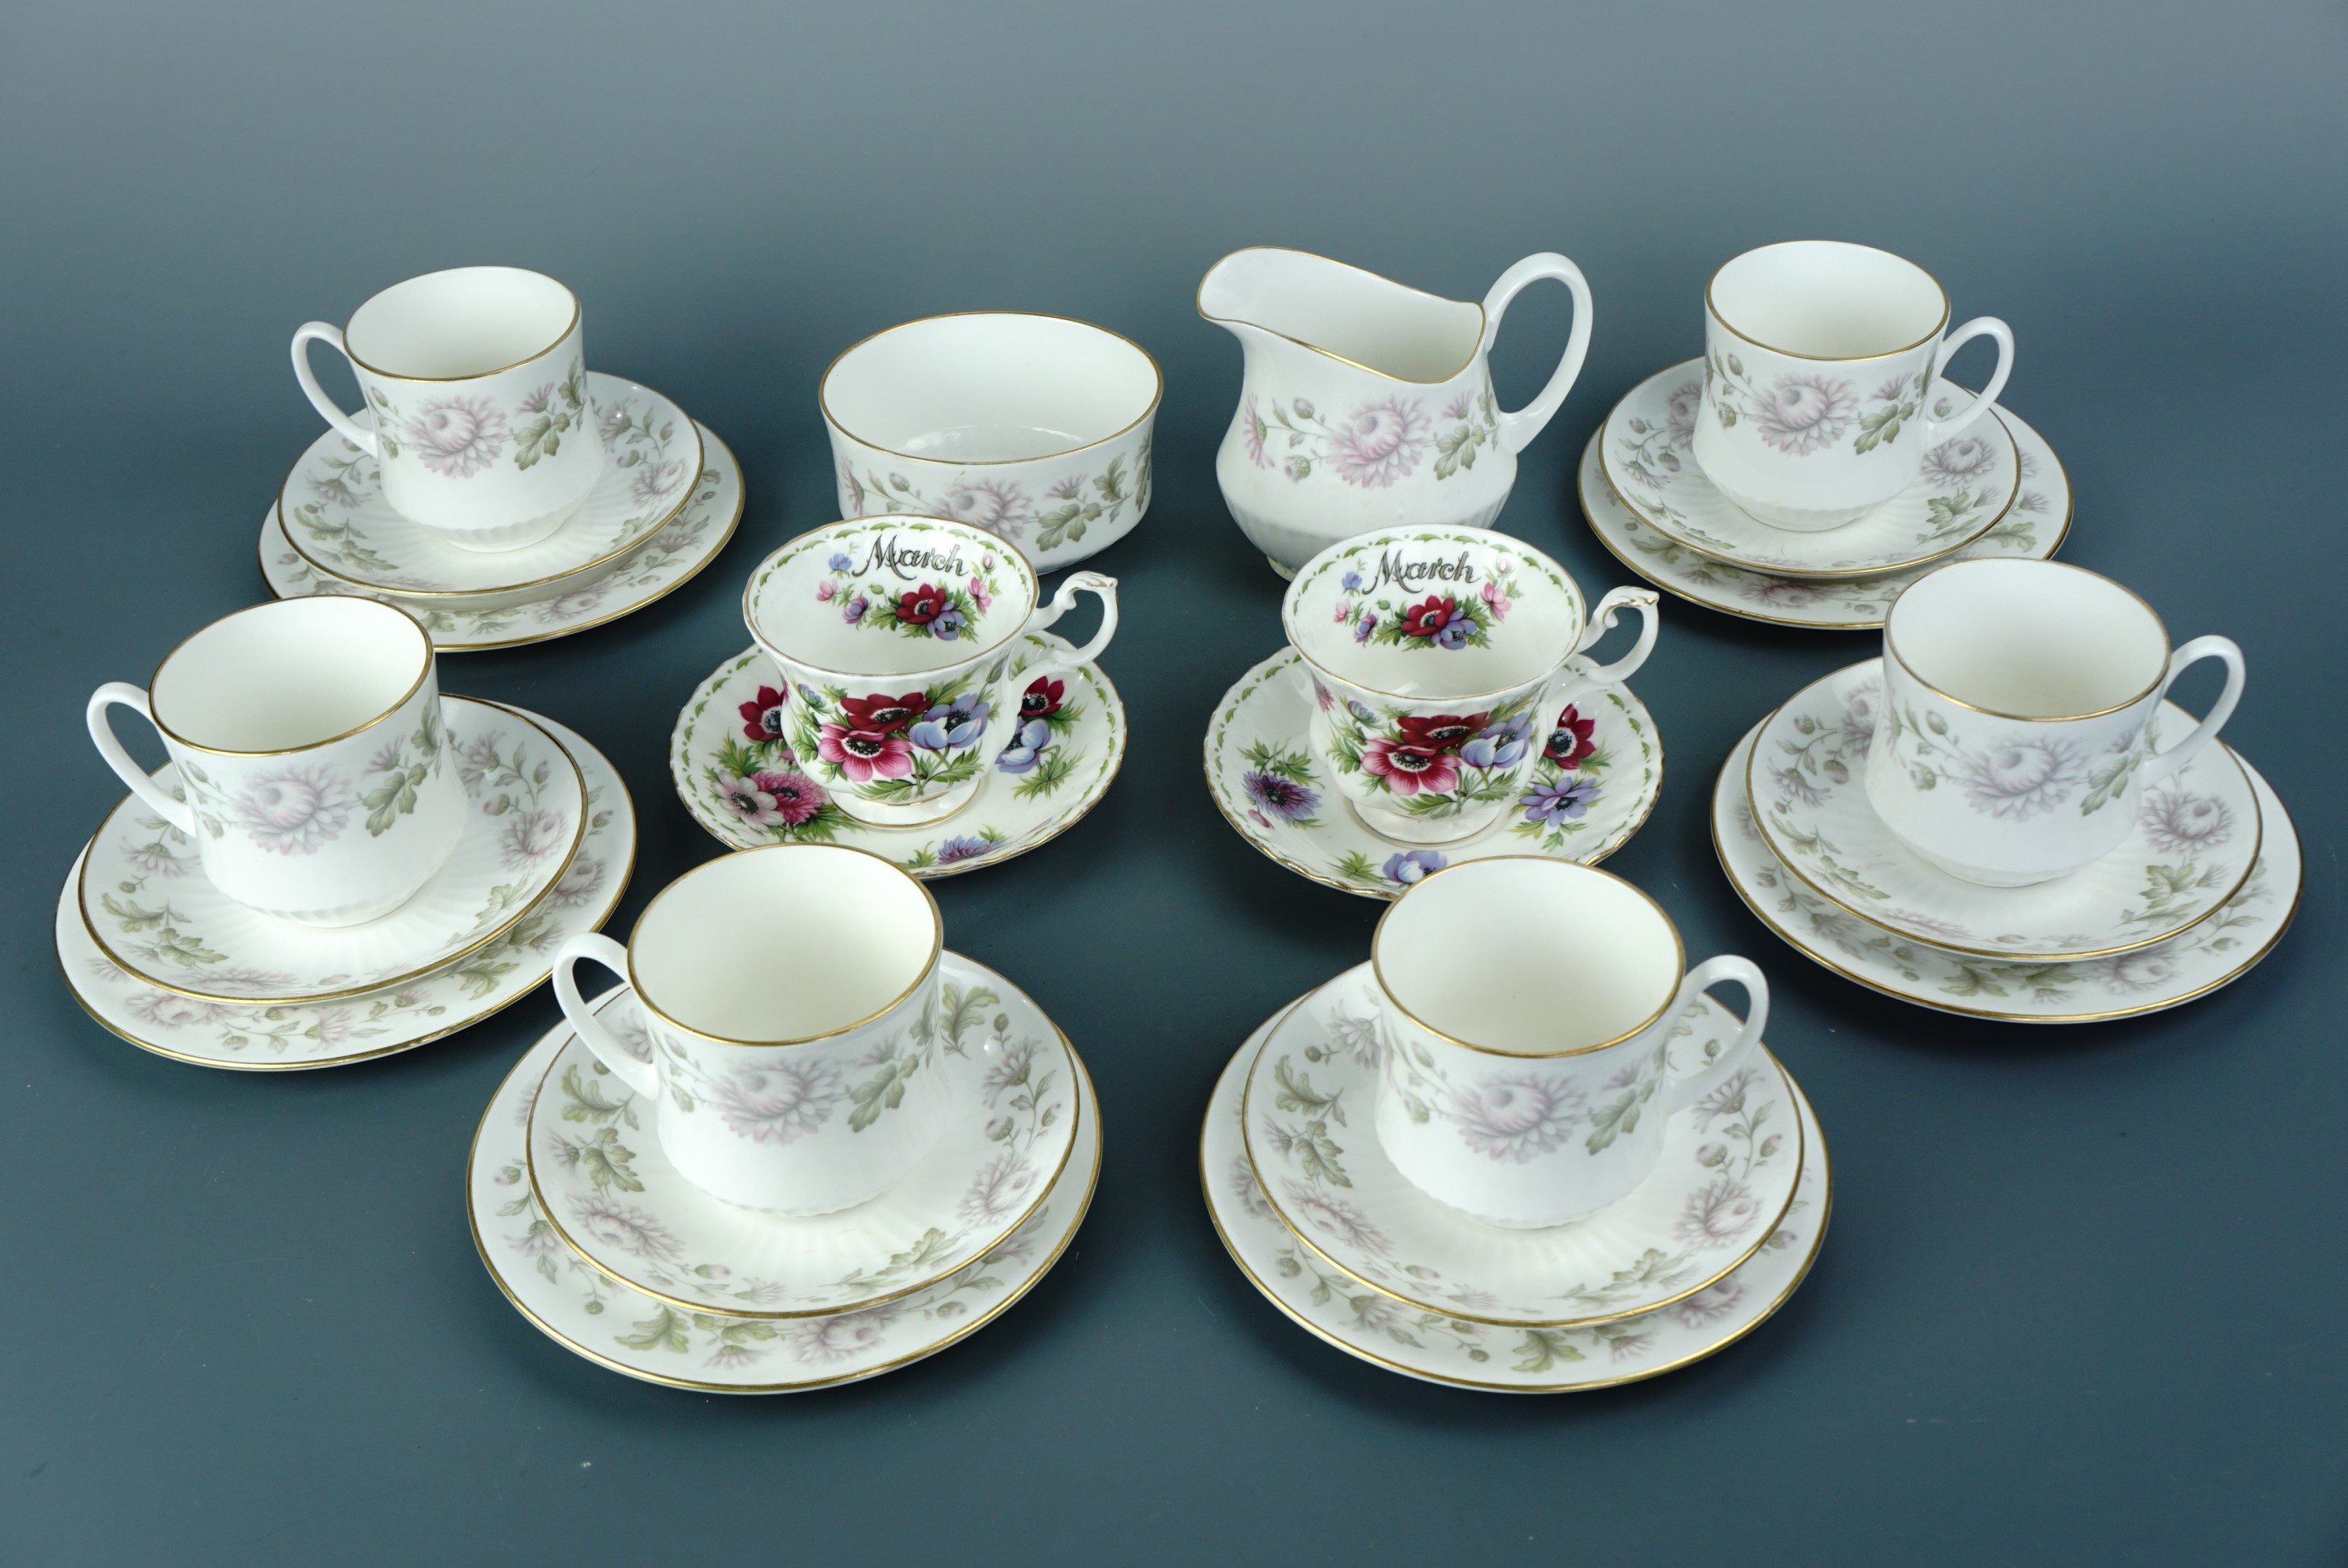 A Duchess "Morning Mist" pattern tea set, together with two Royal Albert Flower of the Month